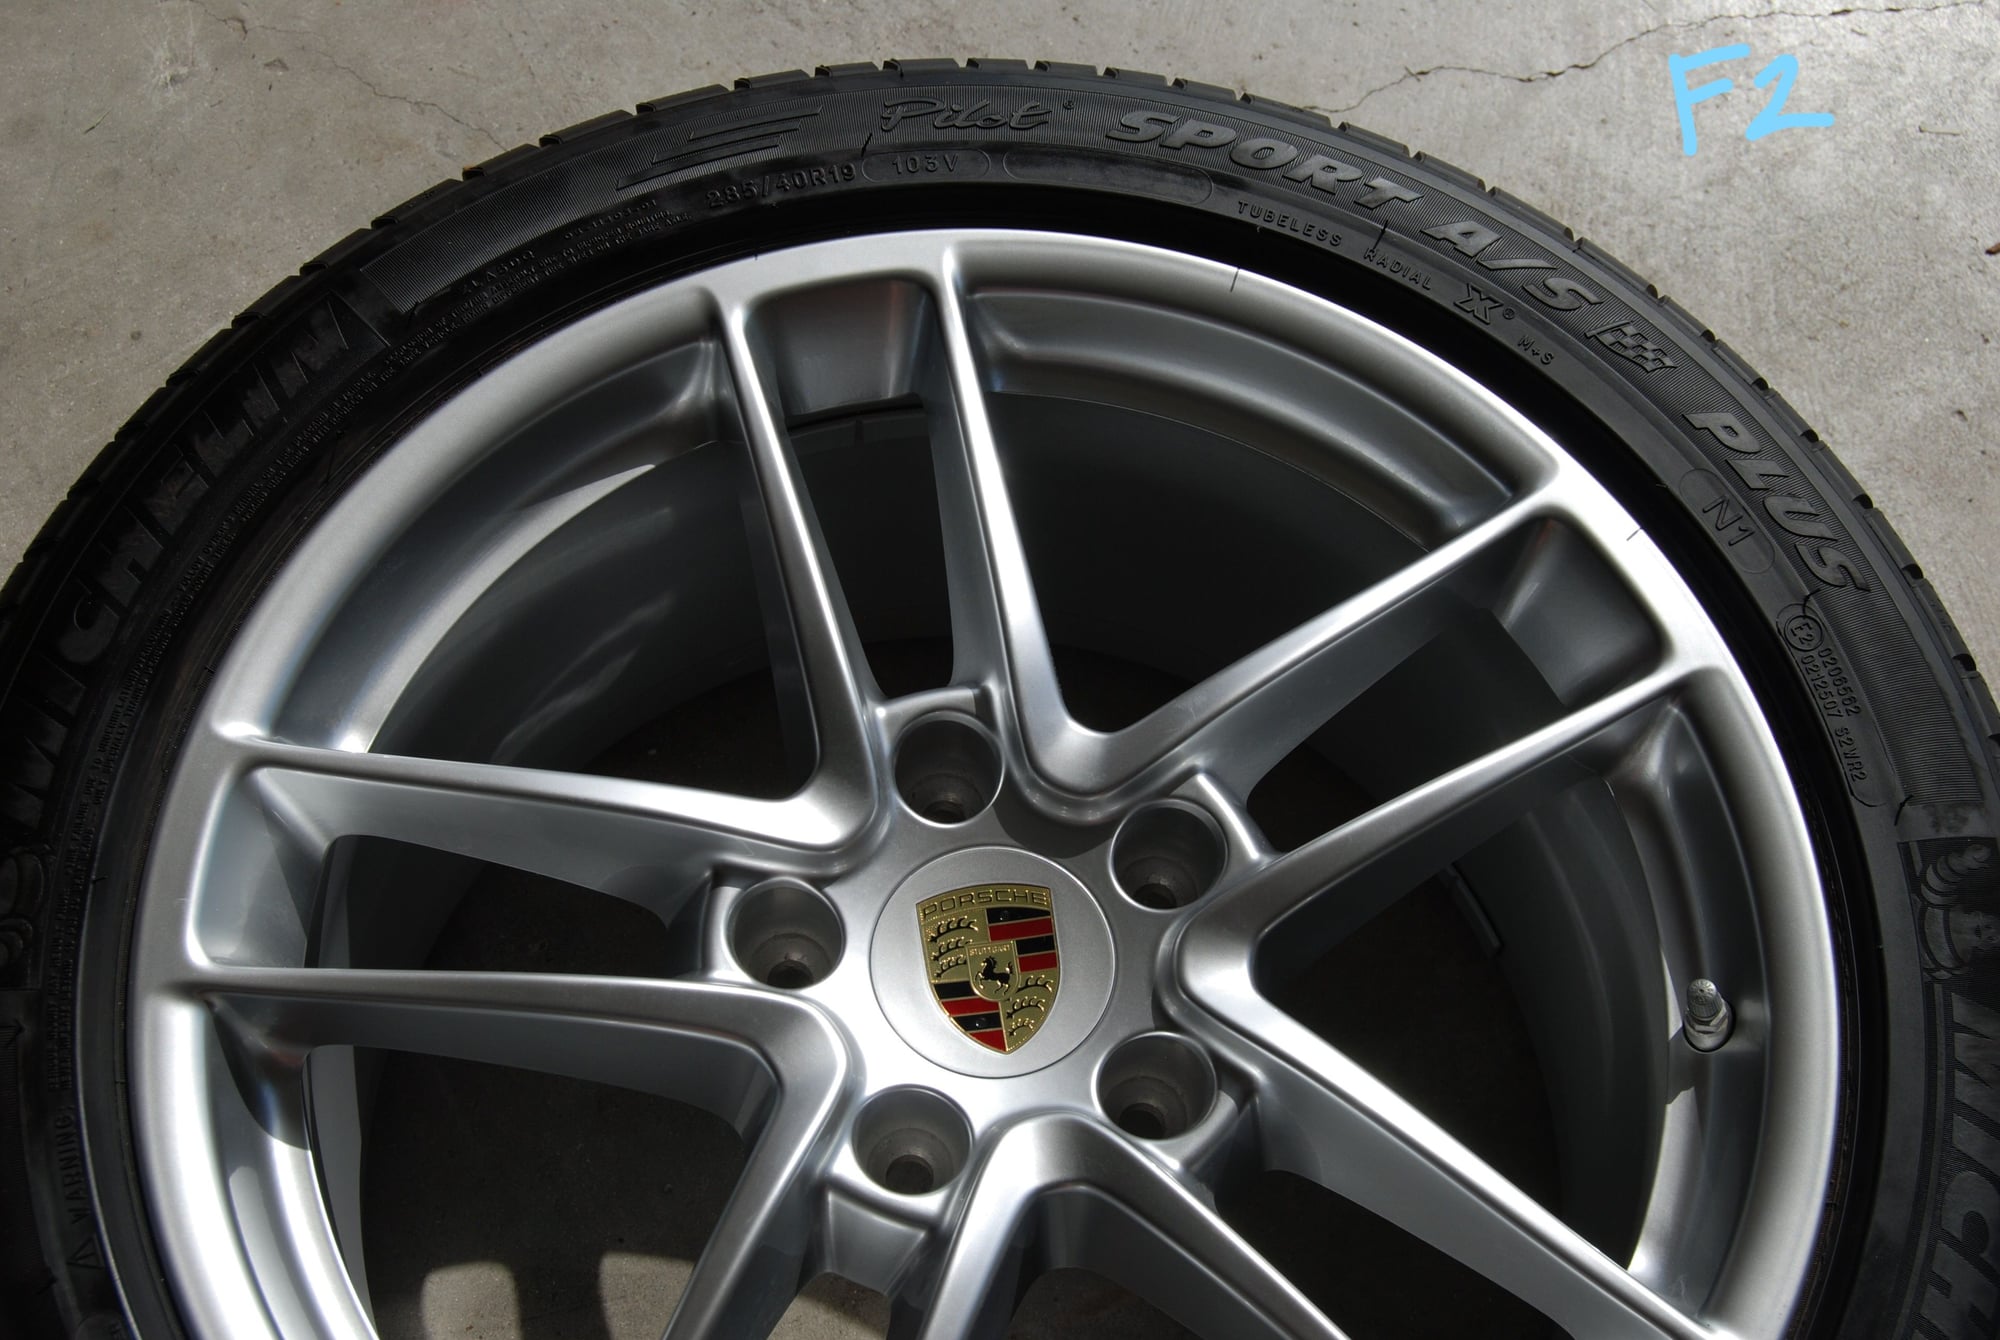 Wheels and Tires/Axles - PANAMERA Wheels/Tires/TPM/ Center Caps Like new - Used - 2014 to 2016 Porsche Panamera - 2009 to 2016 Porsche Panamera - Naples, FL 34109, United States